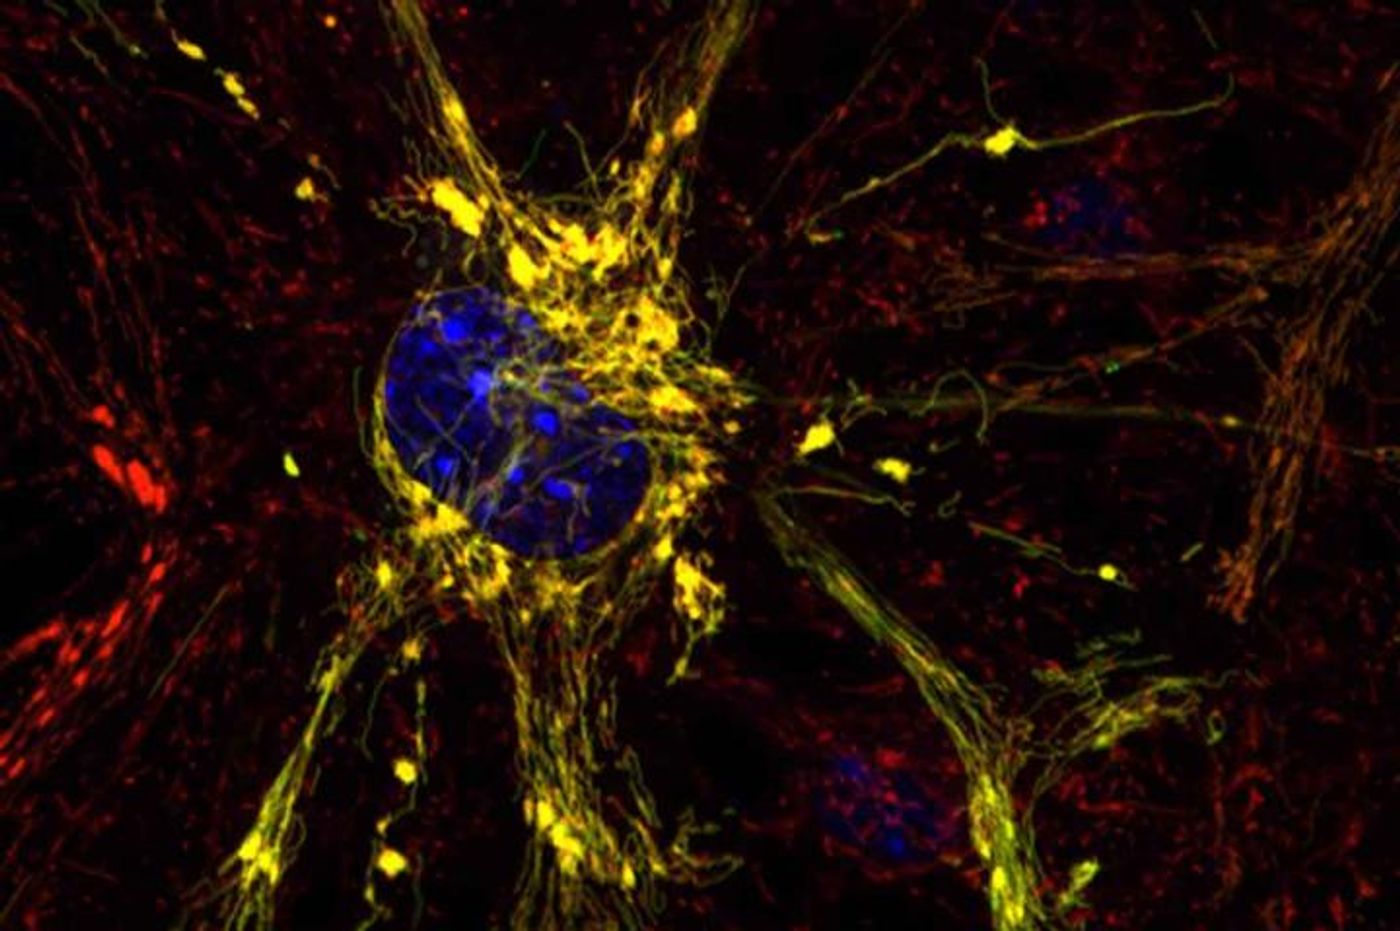 Shown is a diseased neuron, with disease indicated by clumpy yellow mitochondria. Scientists at Washington University School of Medicine in St. Louis and Stanford University have designed small compounds that have the potential to correct mitochondrial dysfunction that leads to Charcot-Marie-Tooth disease and other conditions involving mitochondria, the cells' energy factories./Credit: G. Dorn and A. Franco